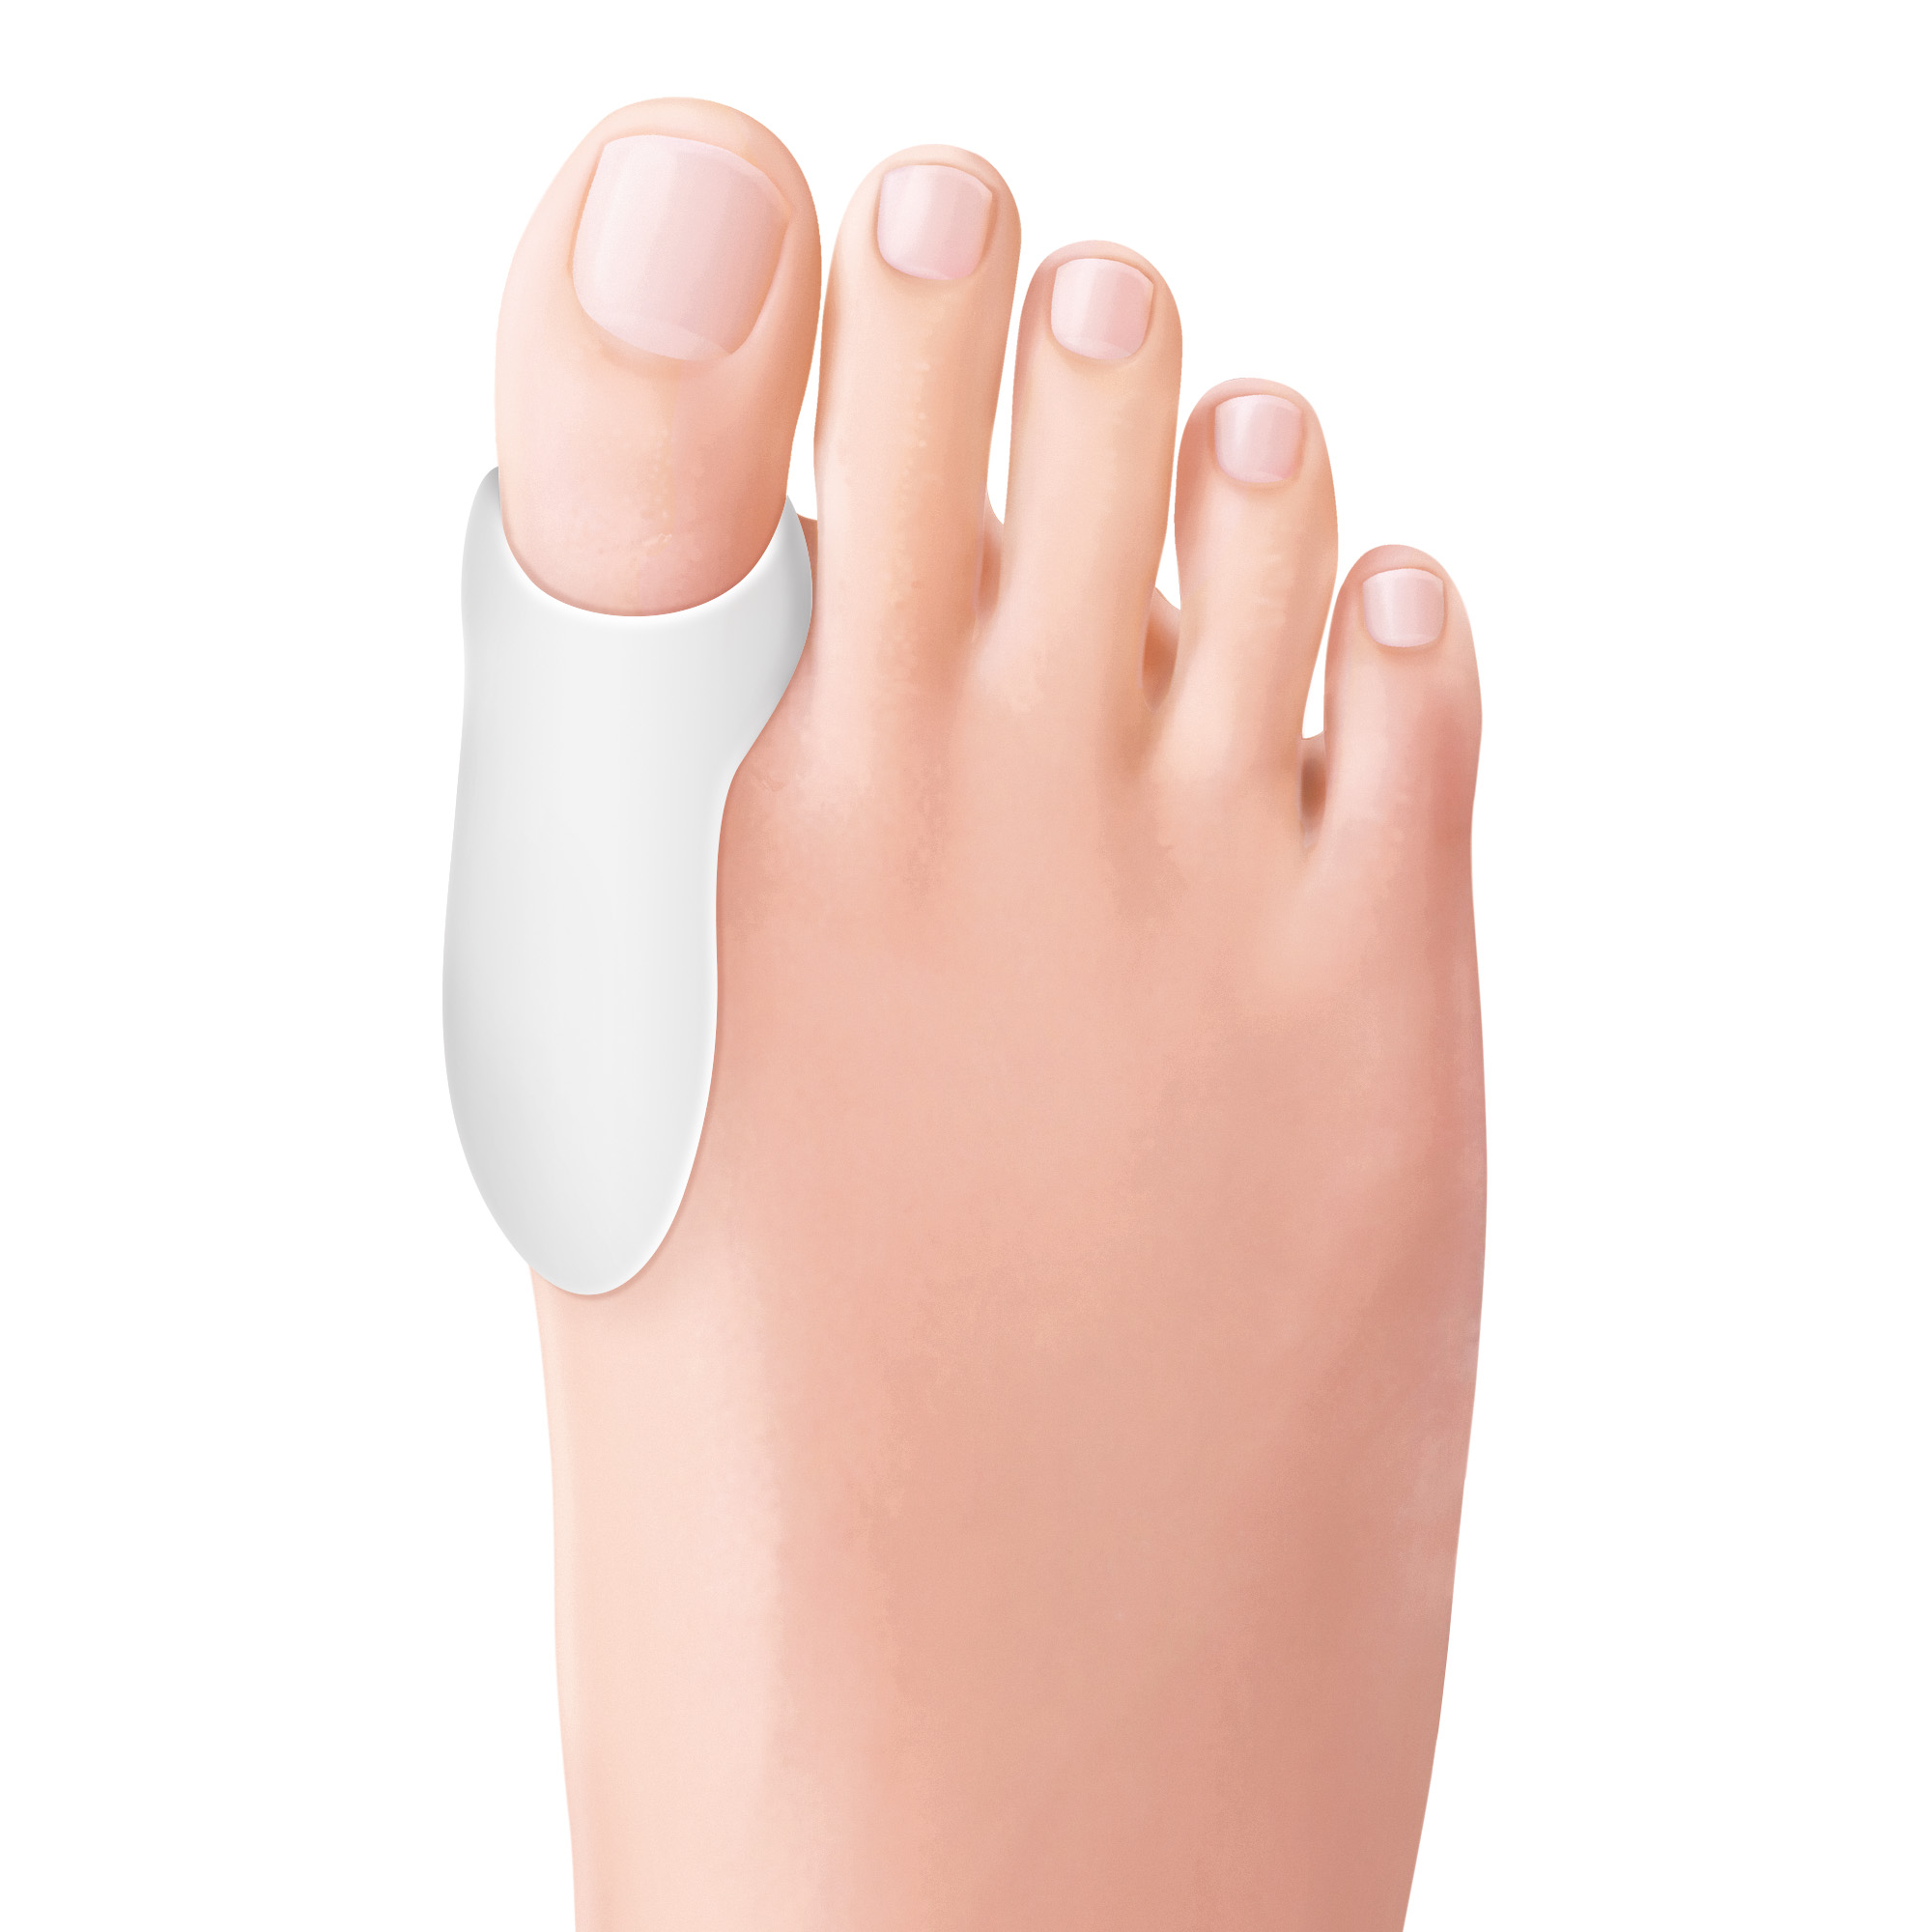 Bunion protection thin 1 pc